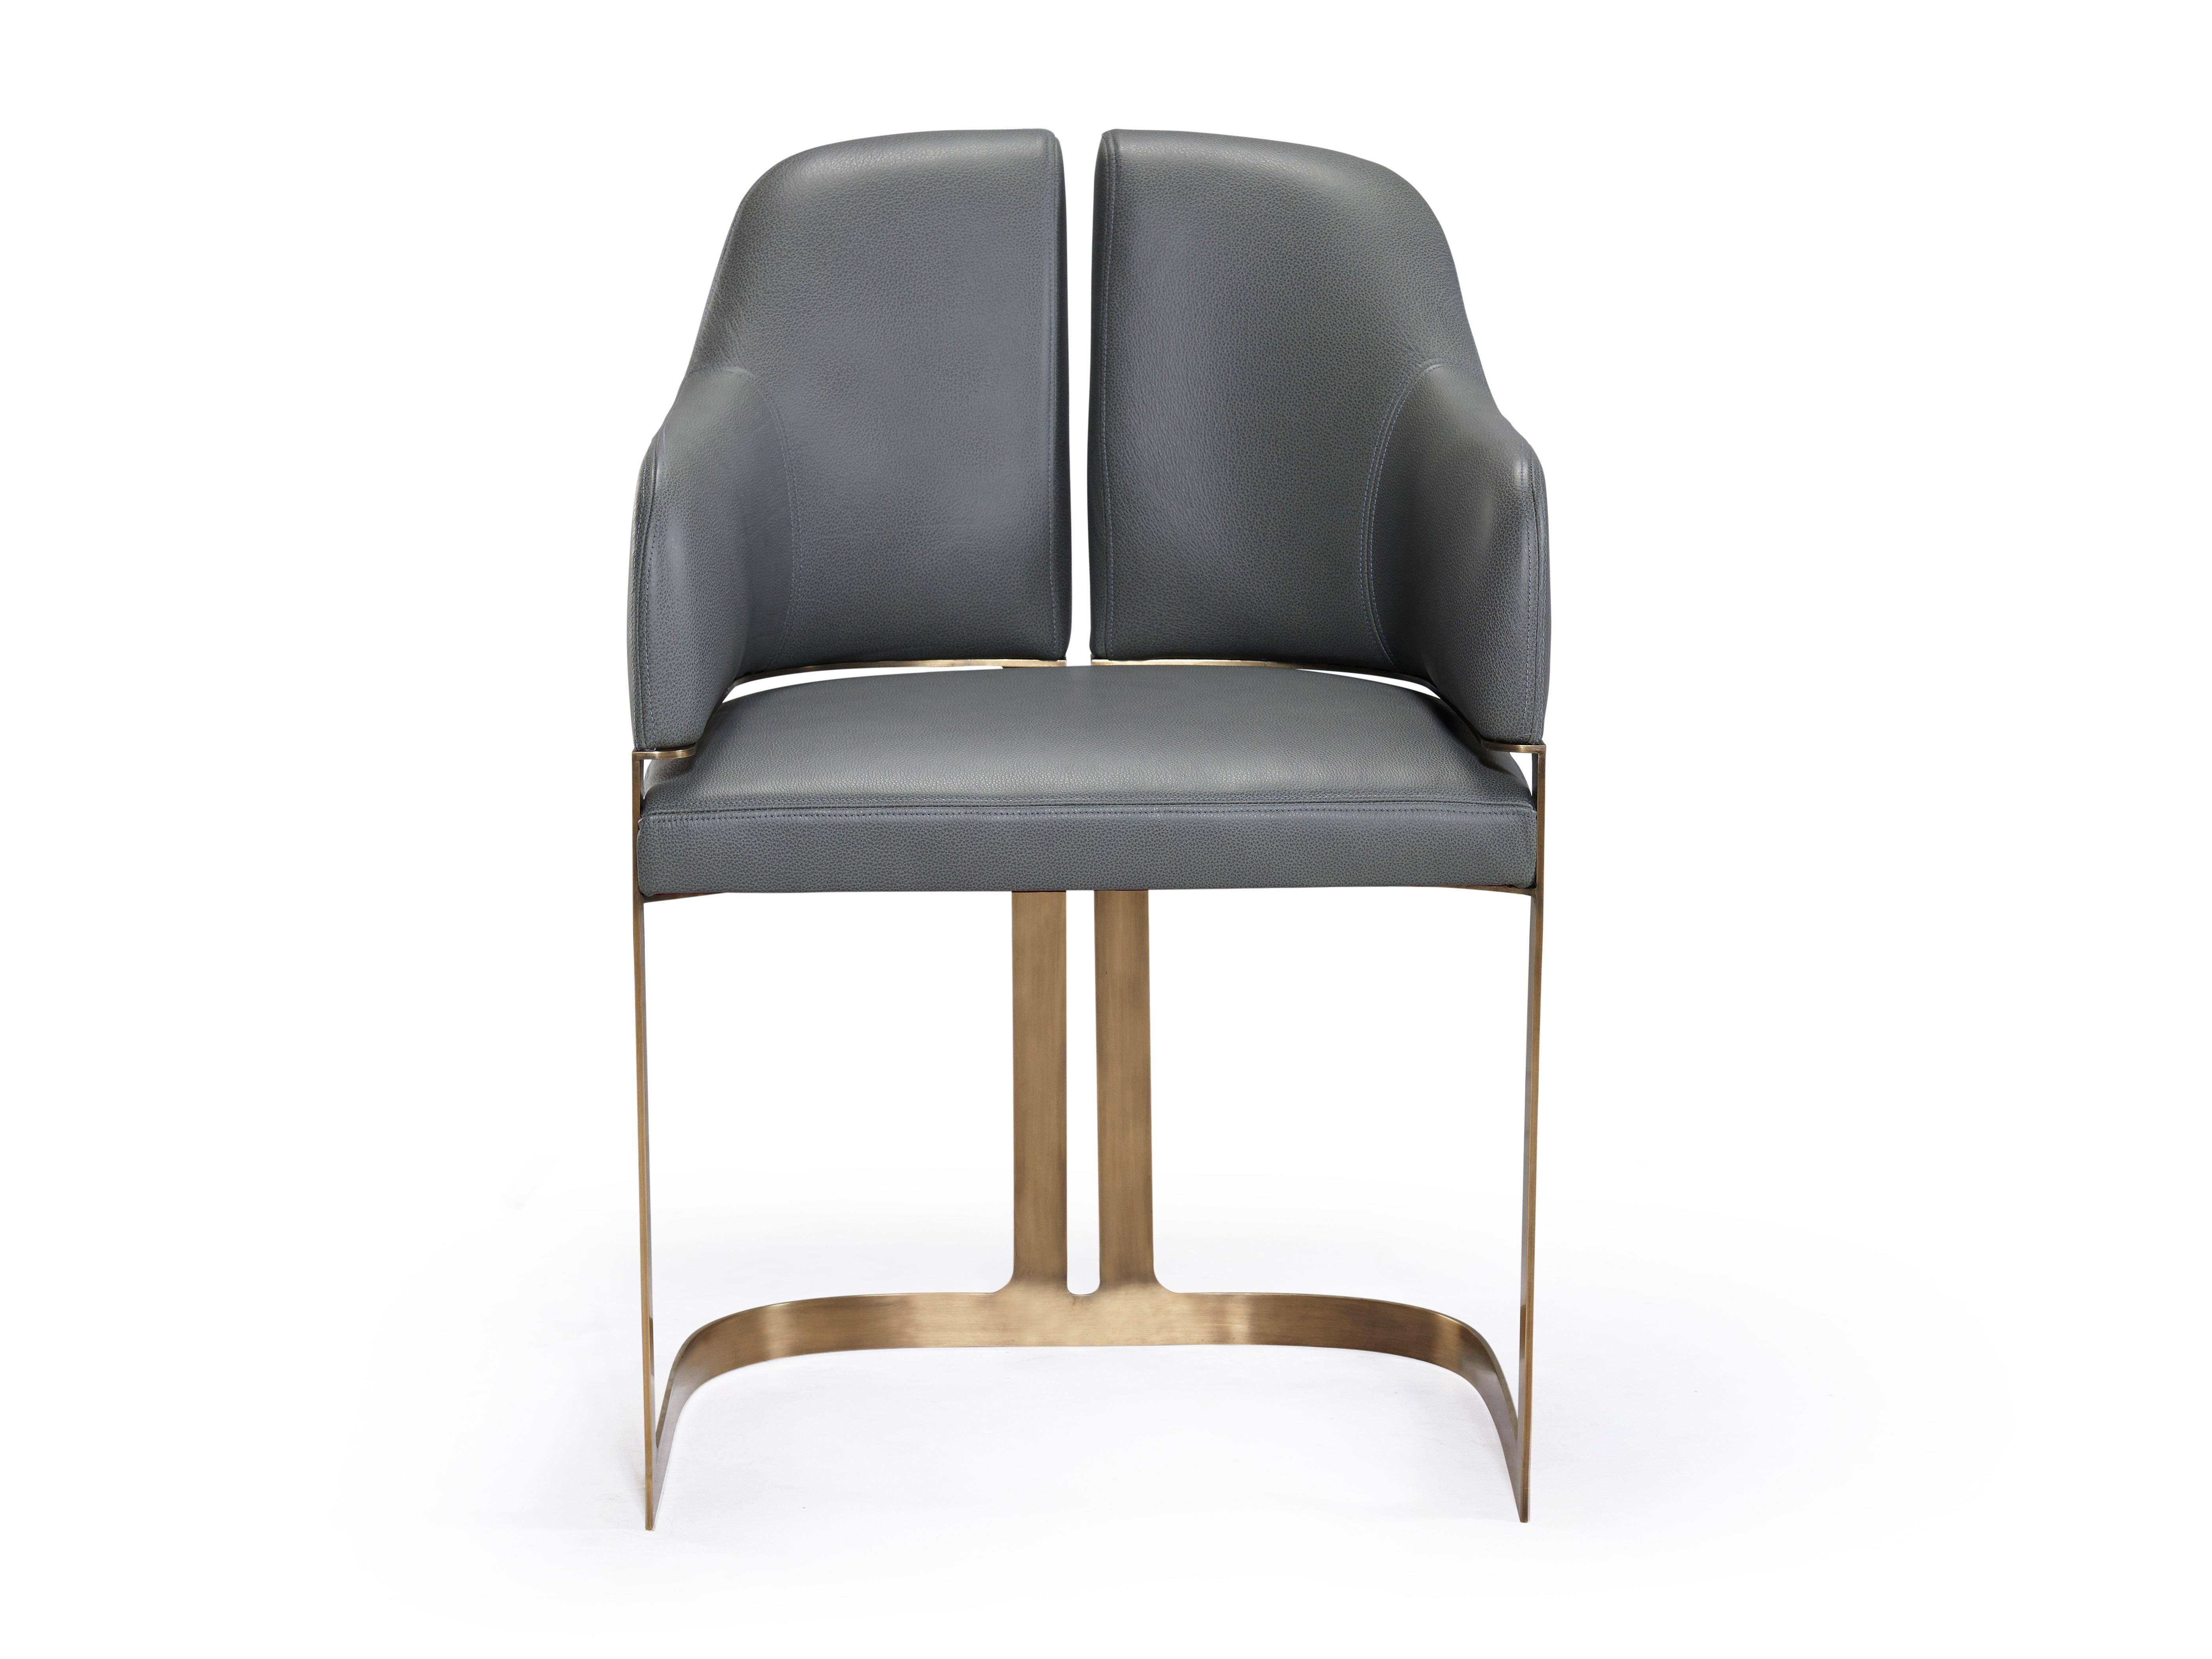 Padus dining and host chair are a graceful, contemporary nod to Art Moderne. A refined curvilinear metal base majestically elevates and defines the upholstered seat and back which similarly echoes the vertical reveal of the base. Available both with